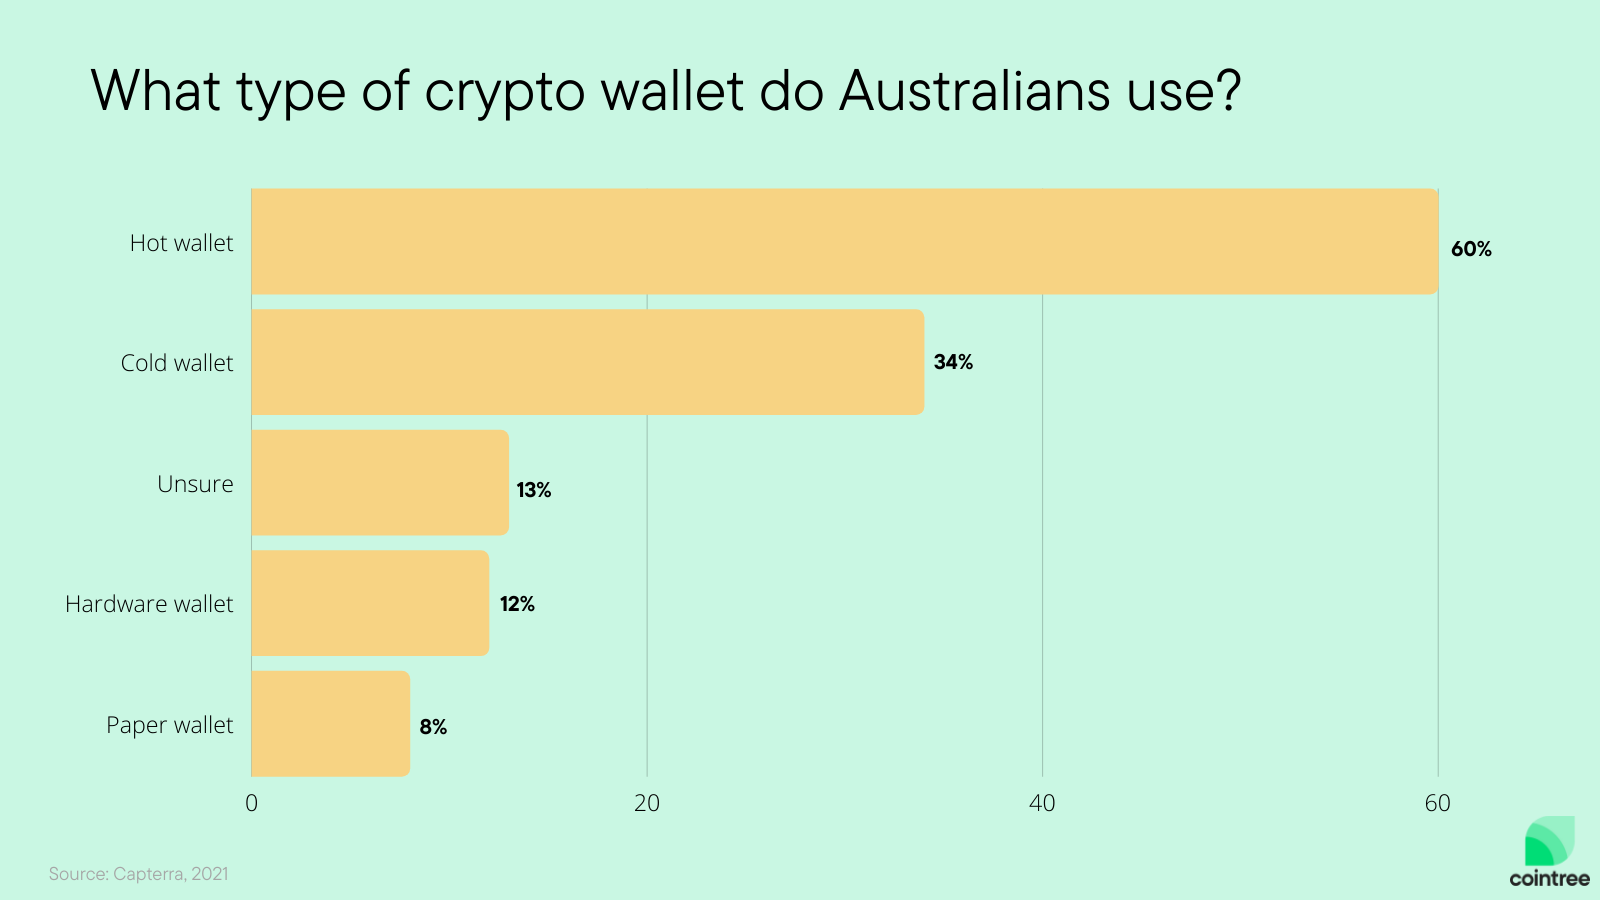 cryptocurrency in australia